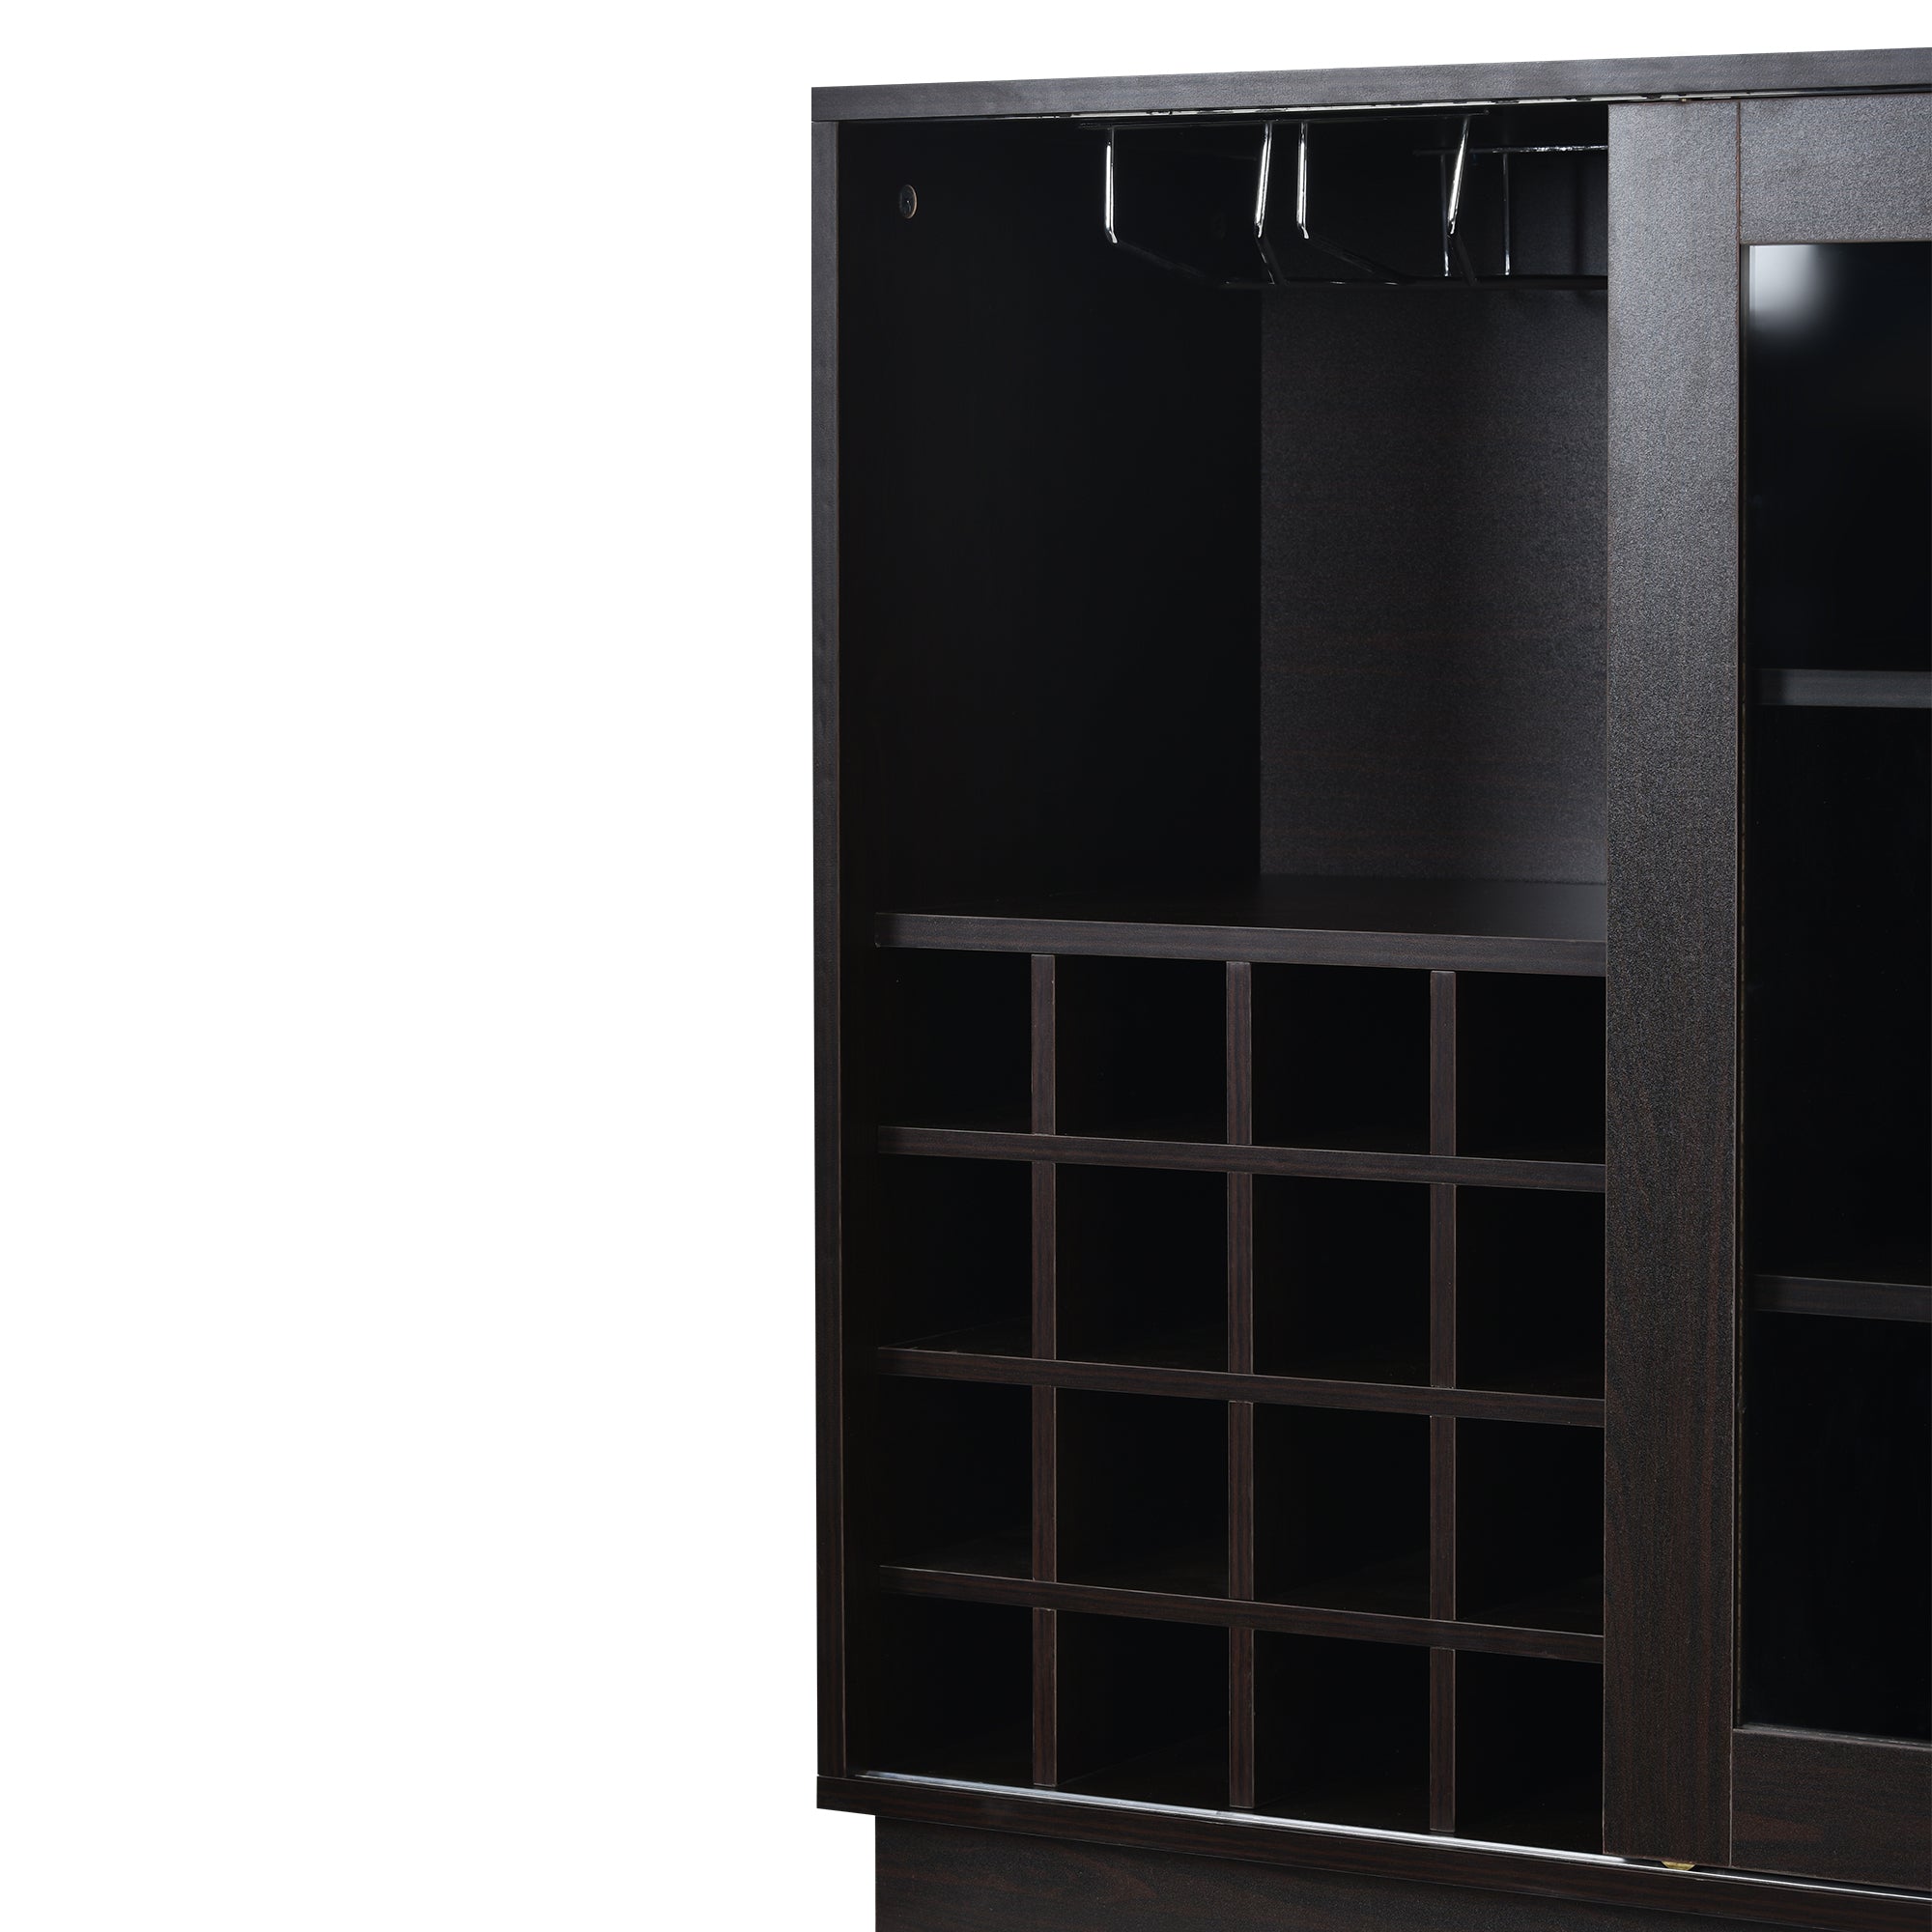 TREXM Sideboard with Integrated wine Cabinet Wine Glass Holder (espresso)